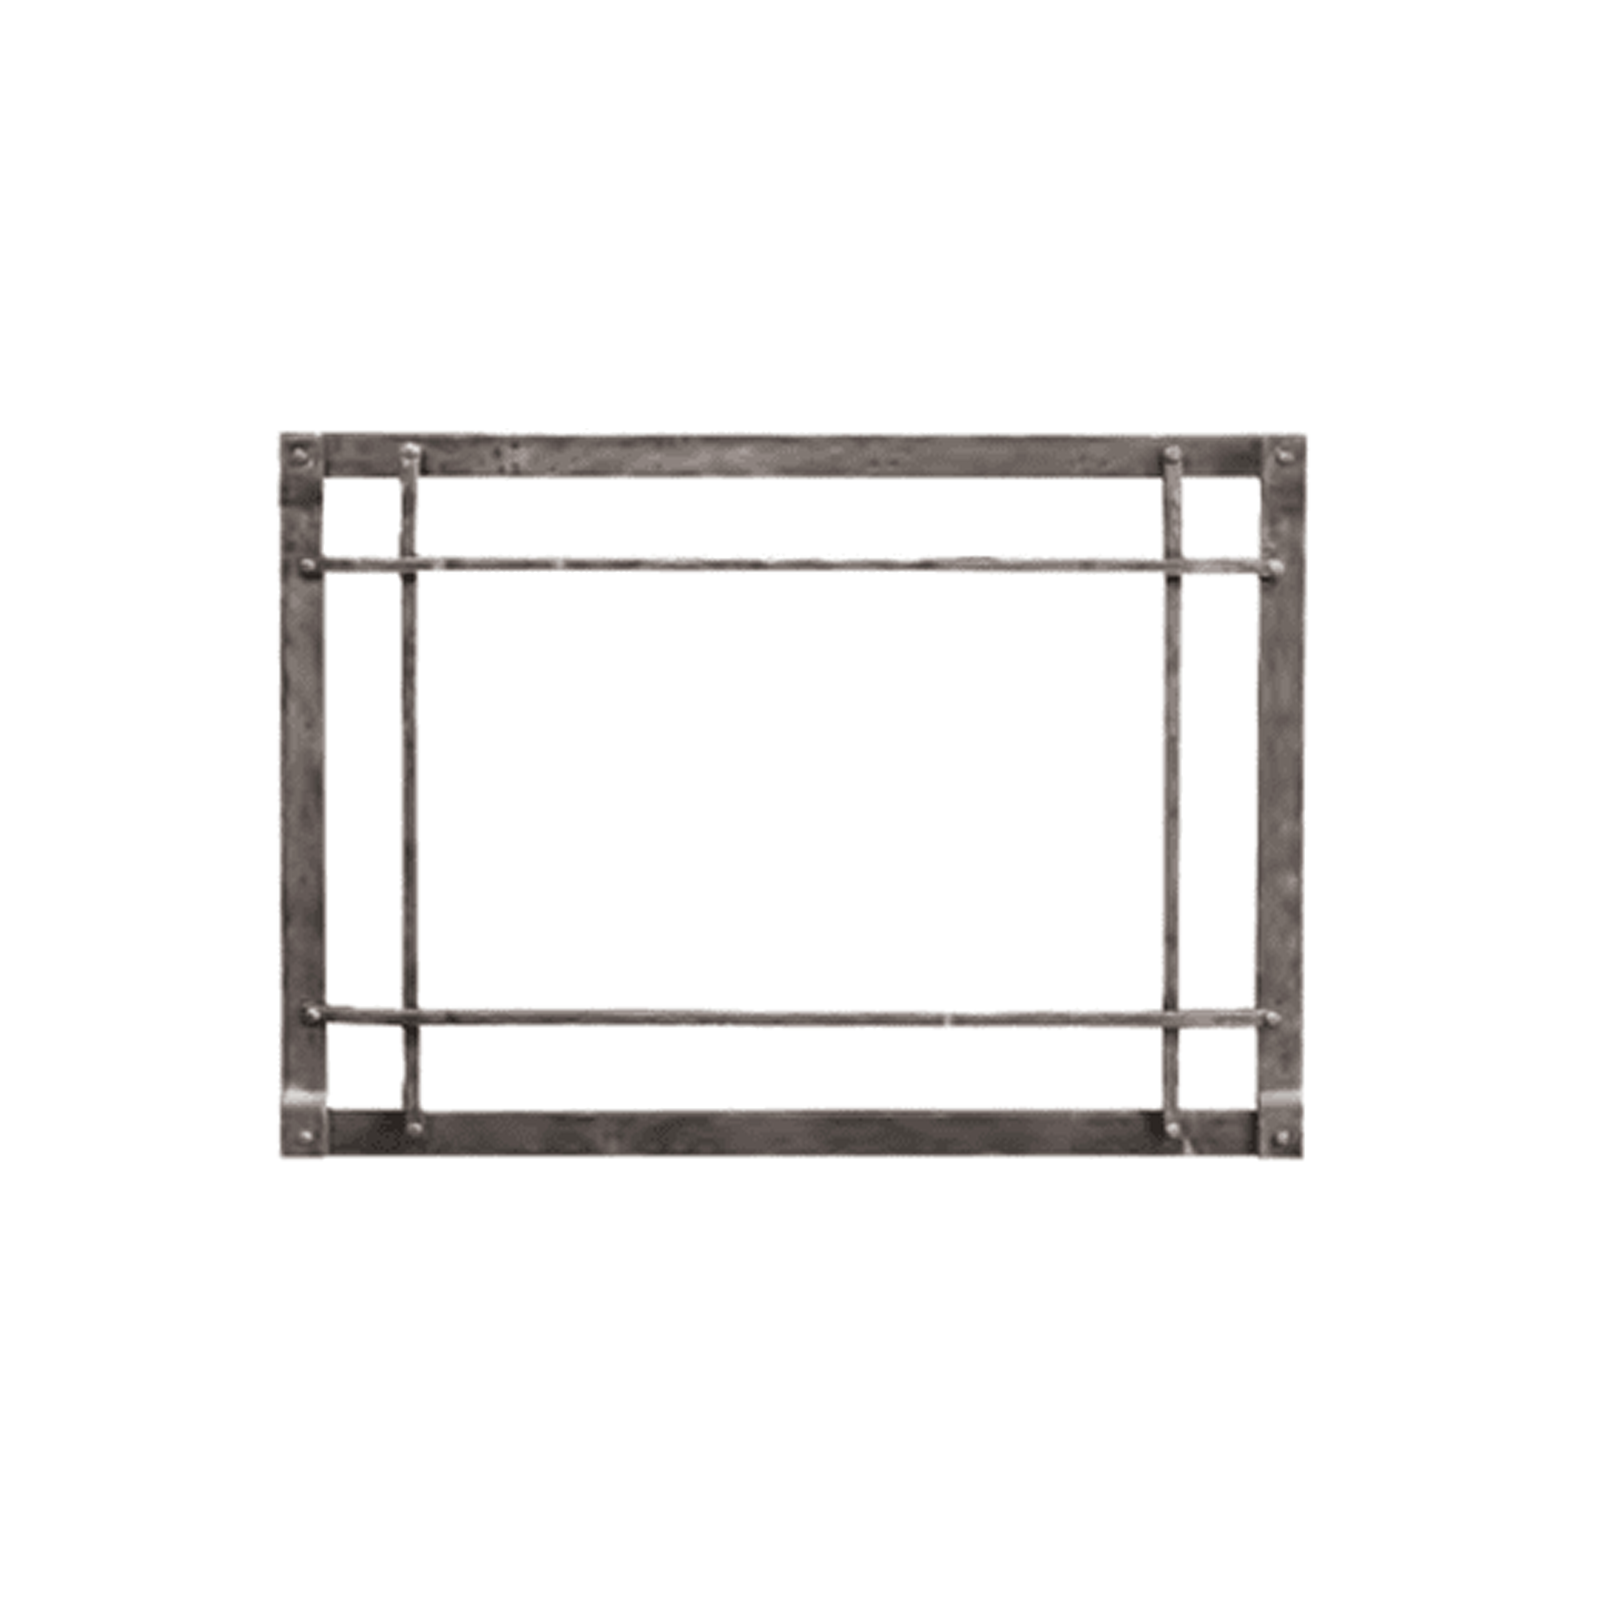 Empire Oil-Rubbed Bronze Forged Iron Frame - DFF35FBZT